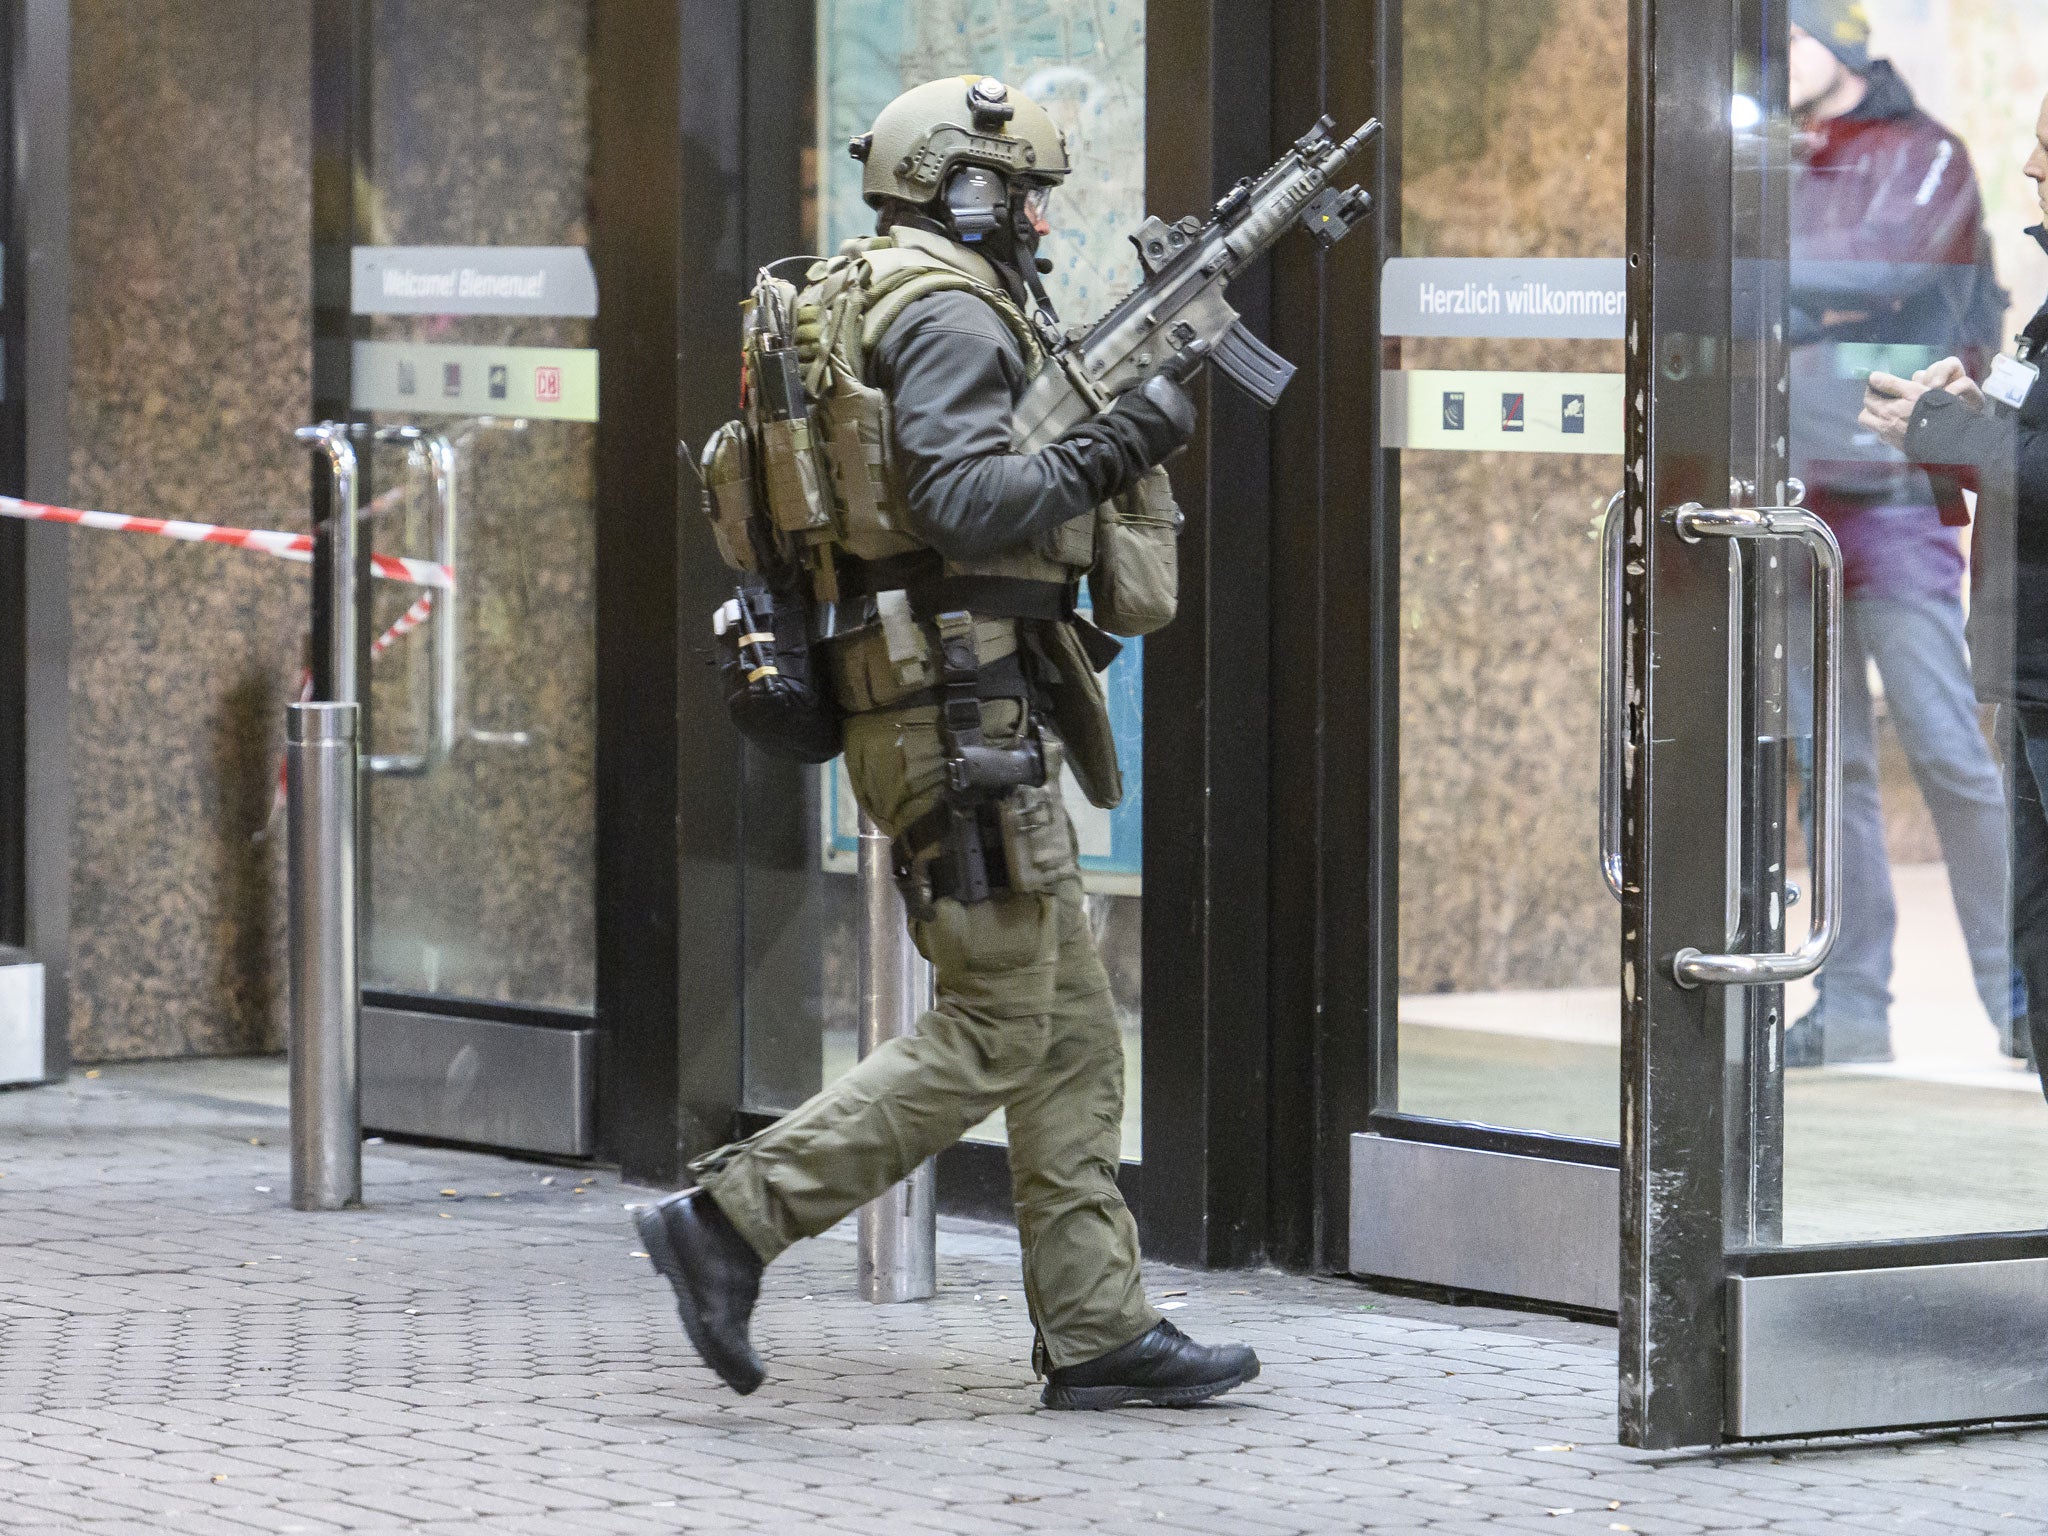 Police enter the main railway station in Dusseldorf following what police described as an axe attack